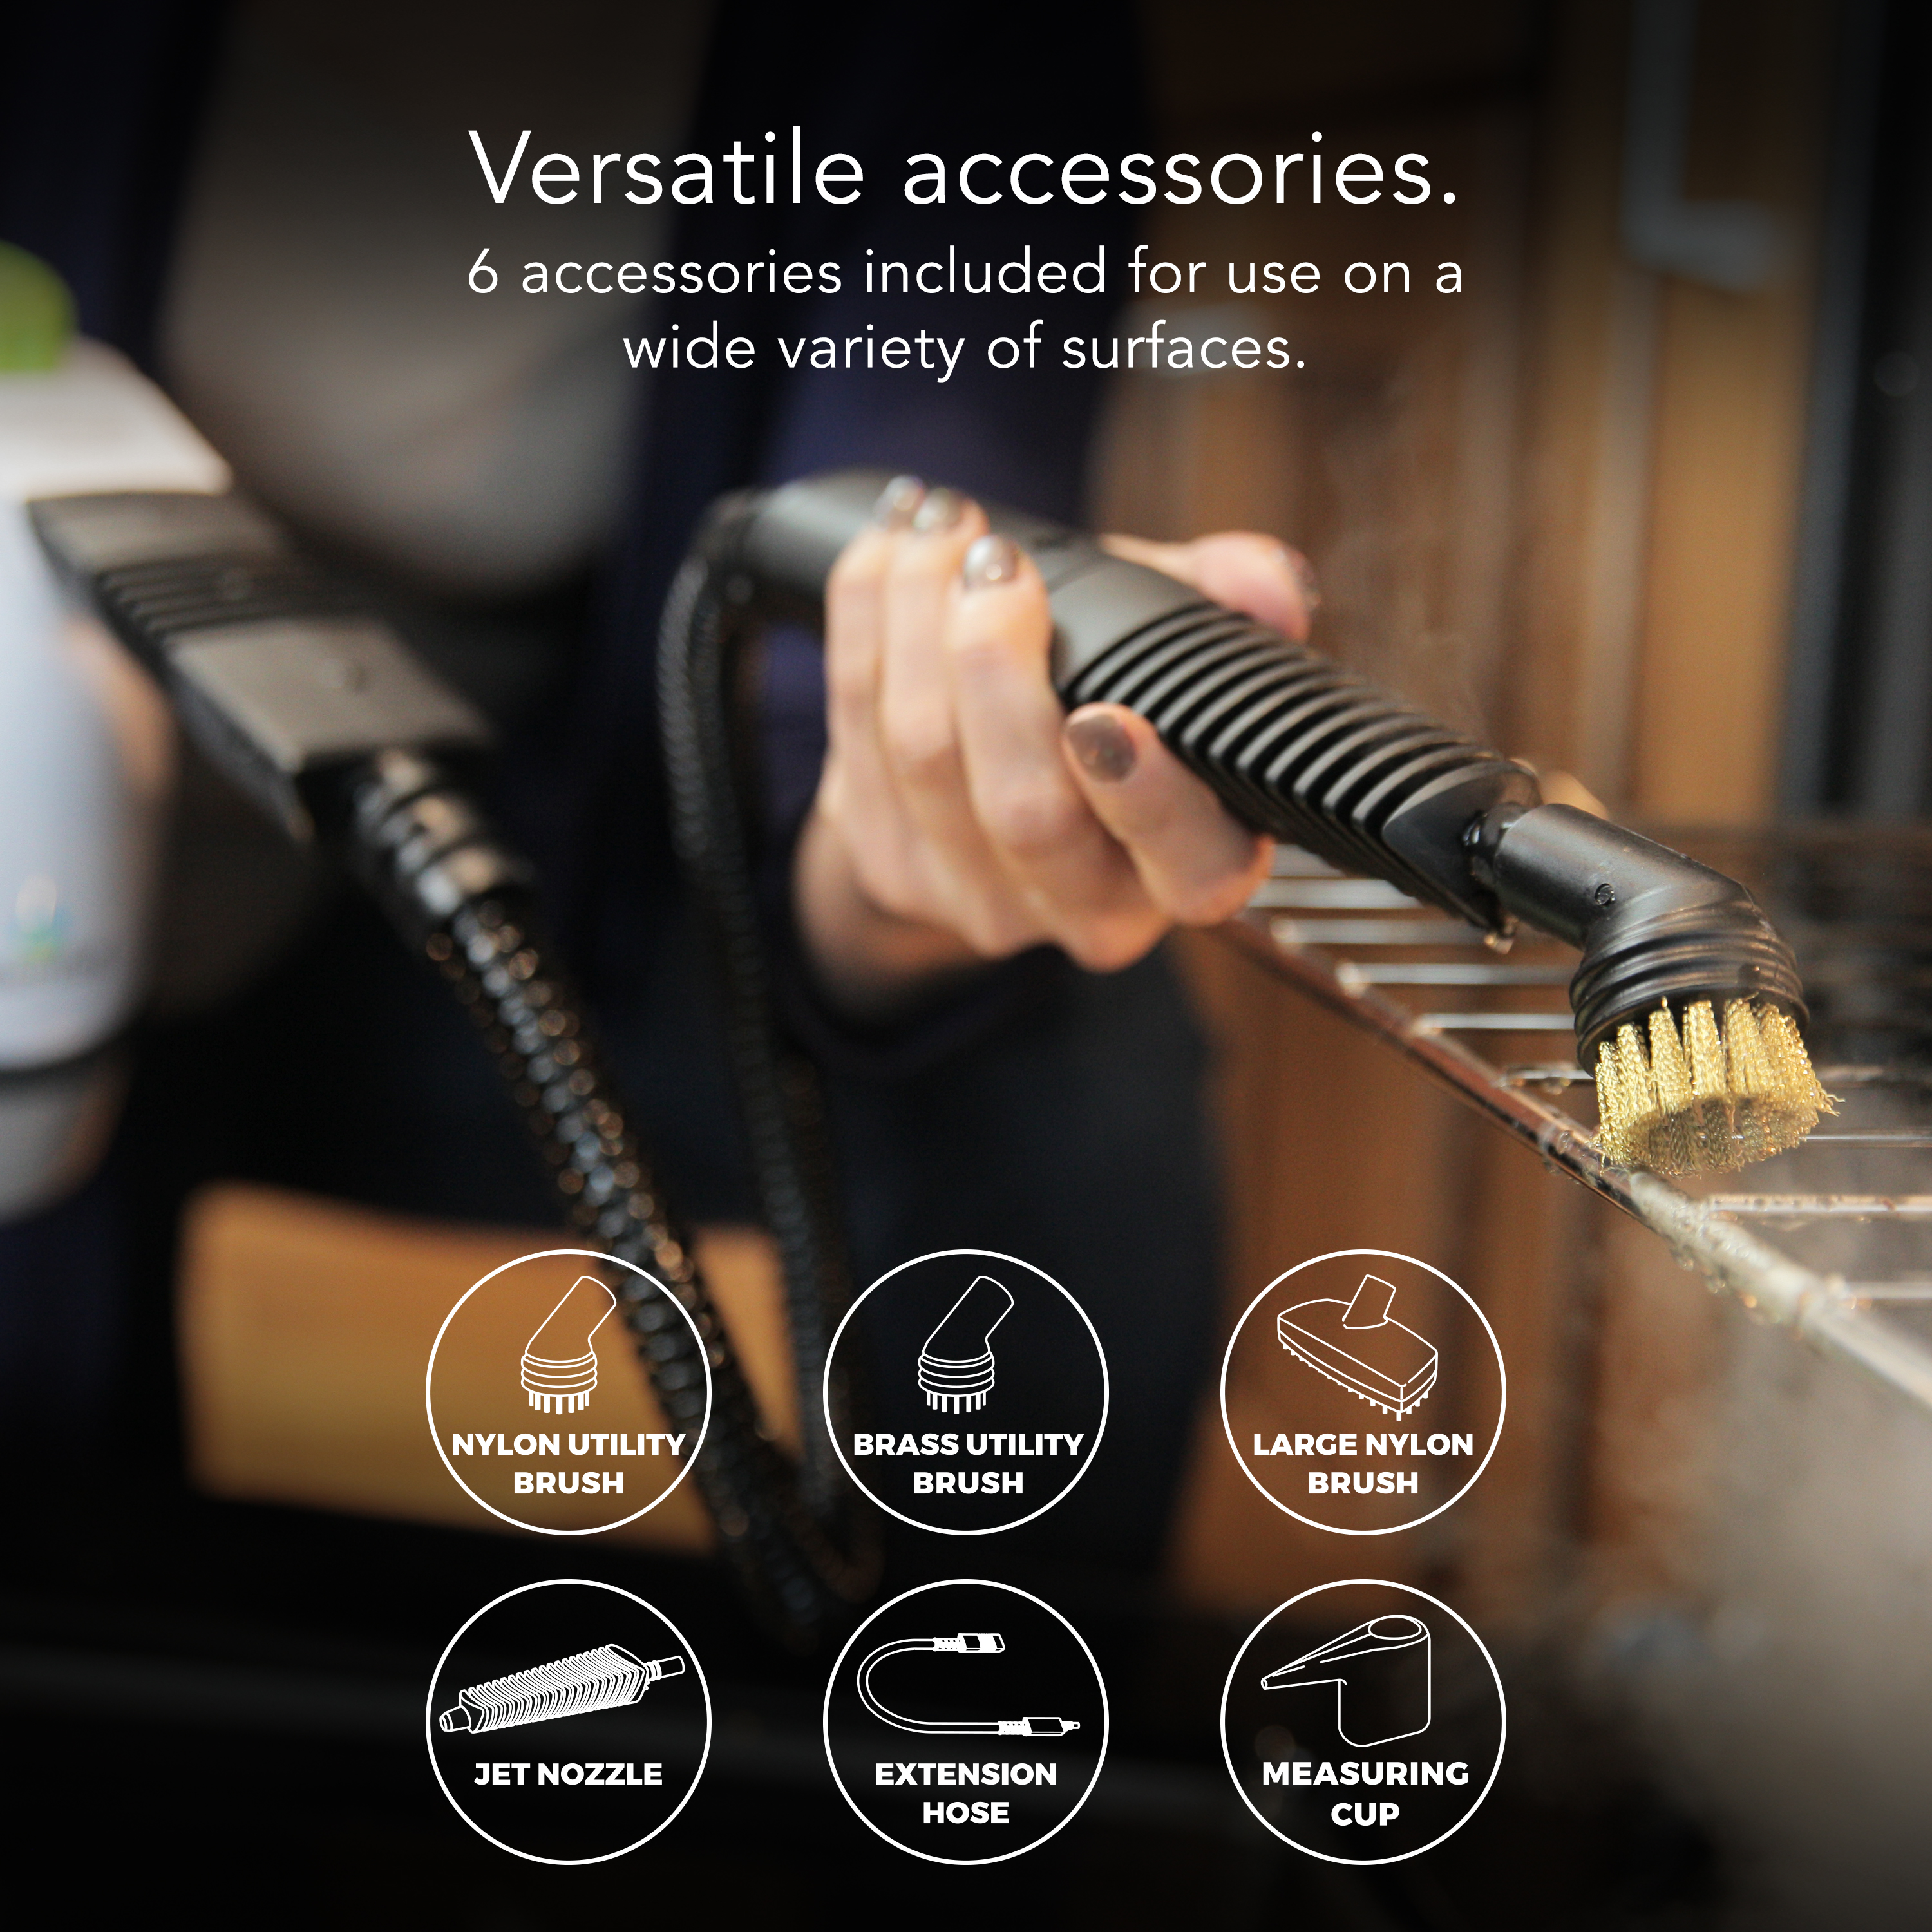 Steamfast SF-210 Handheld Steam Cleaner with 6 Accessories - image 3 of 8